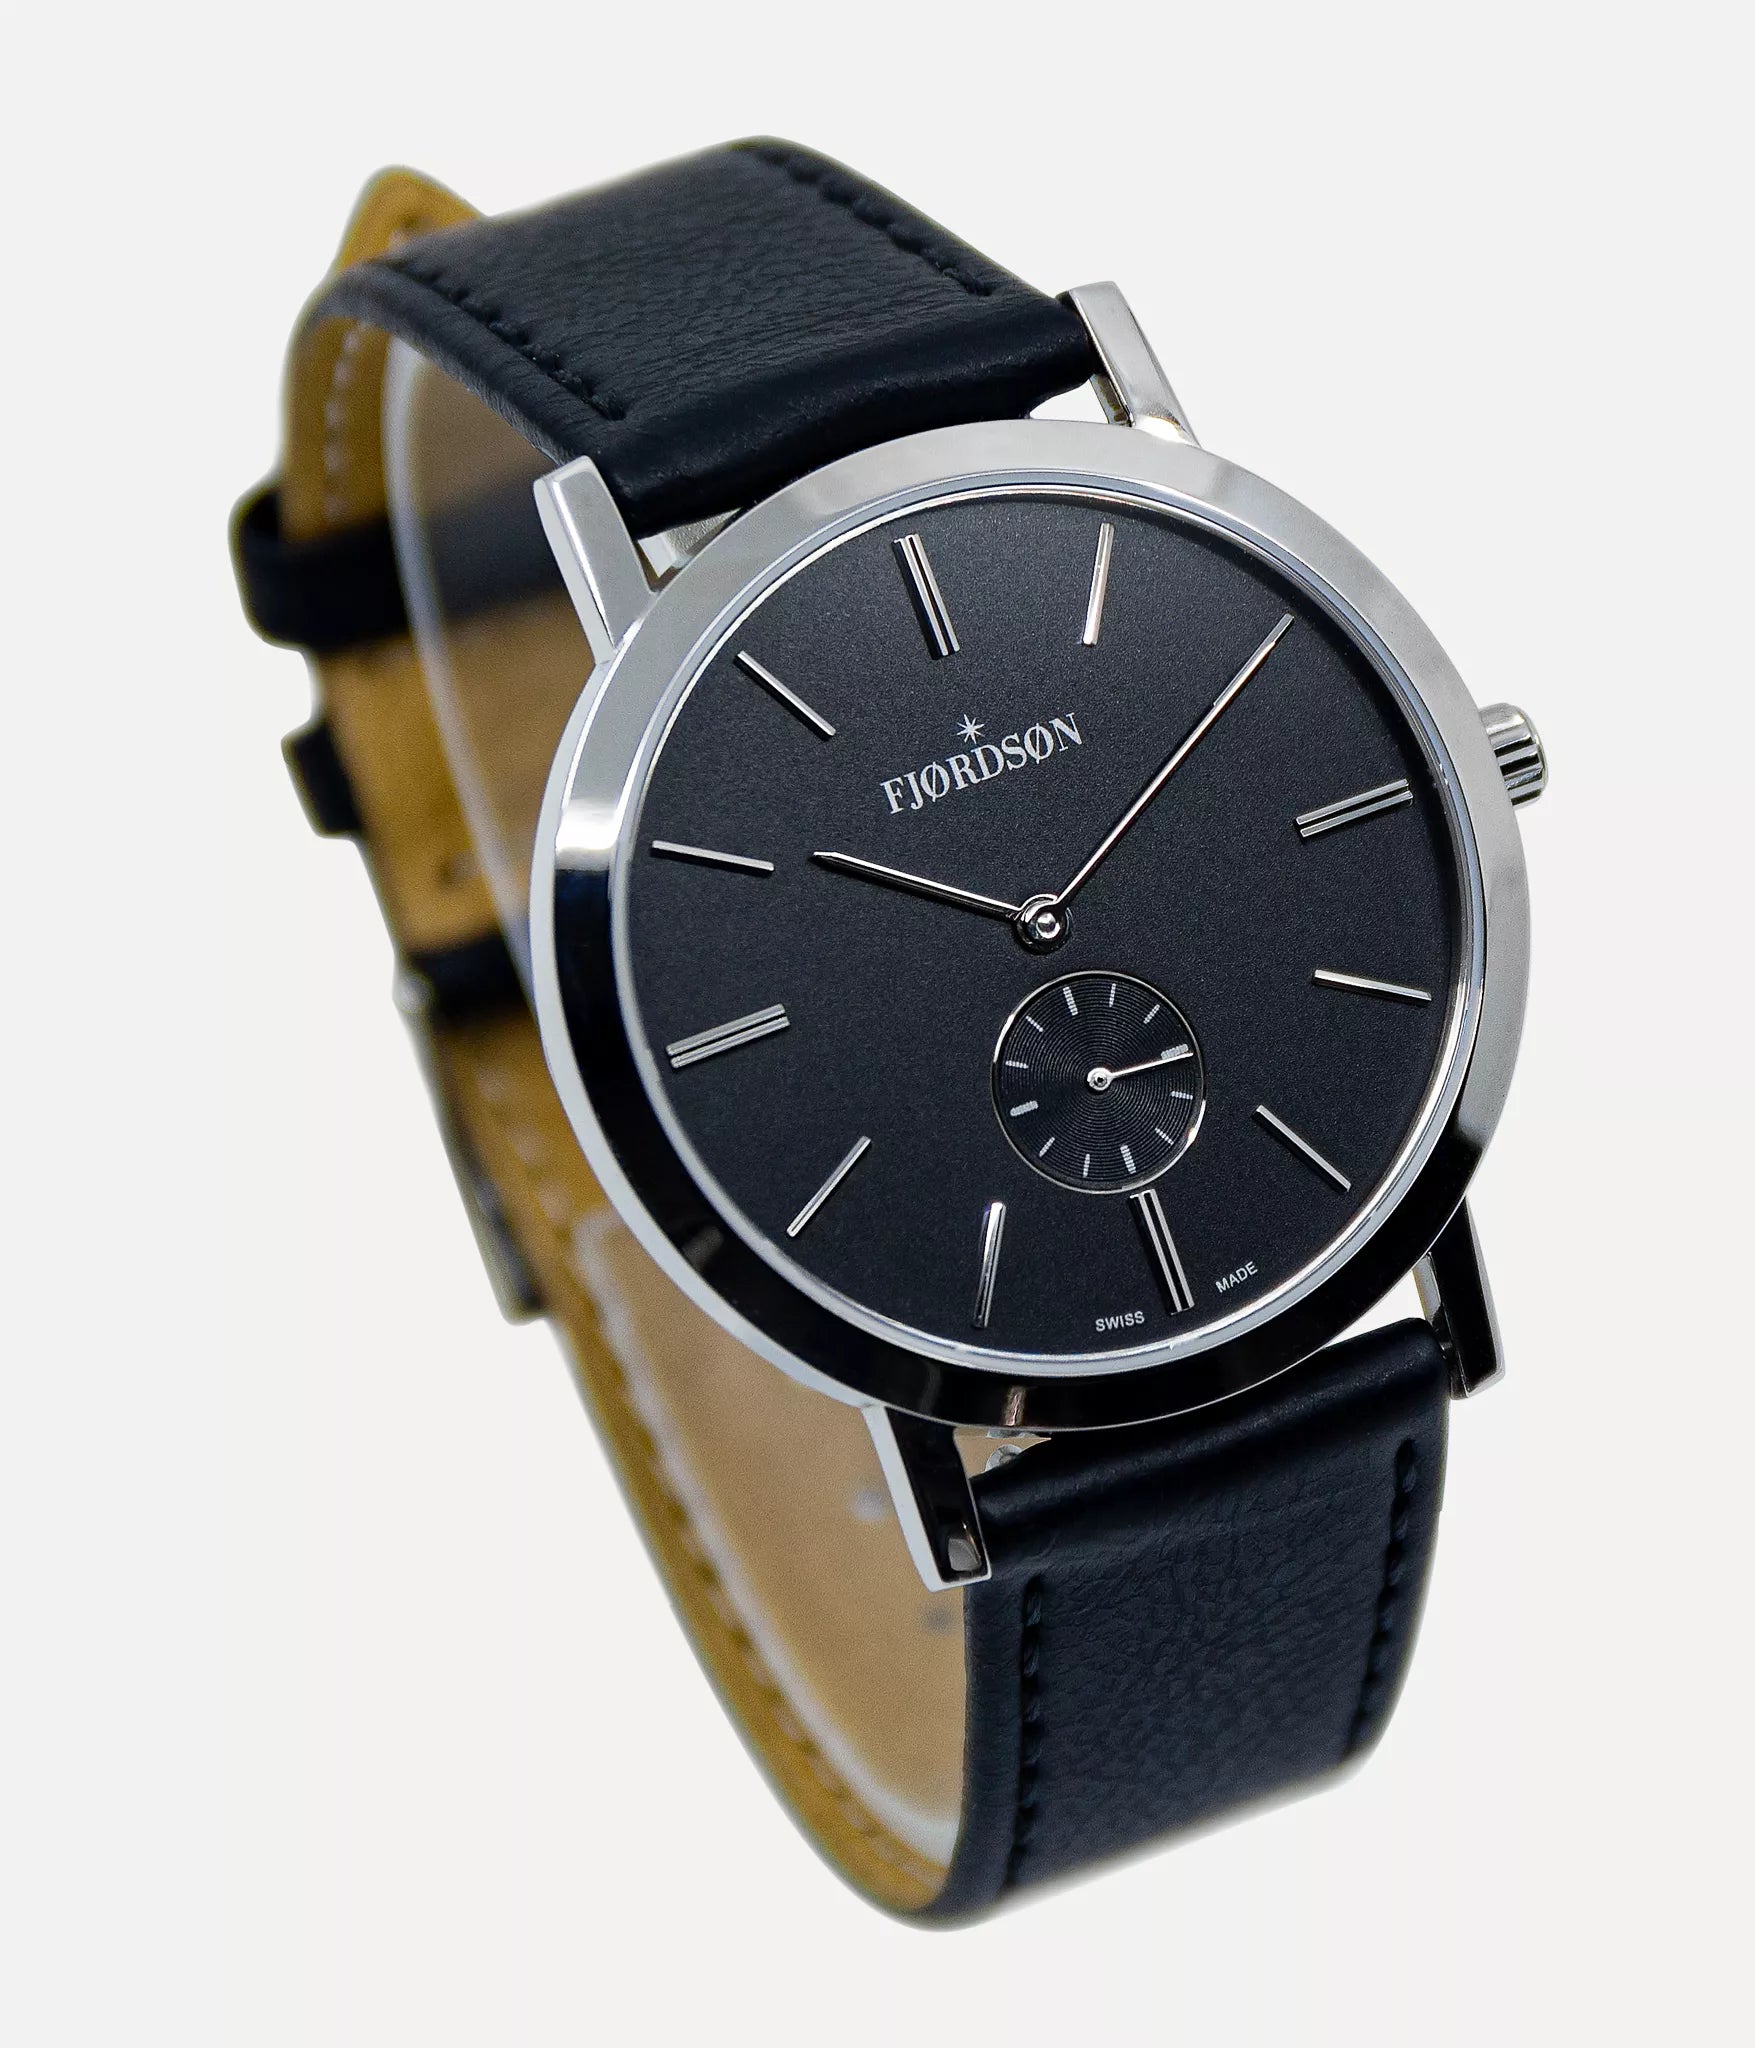 Vegan Watch Guide: Leather-Free & Sustainable Watch Brands You'll Love